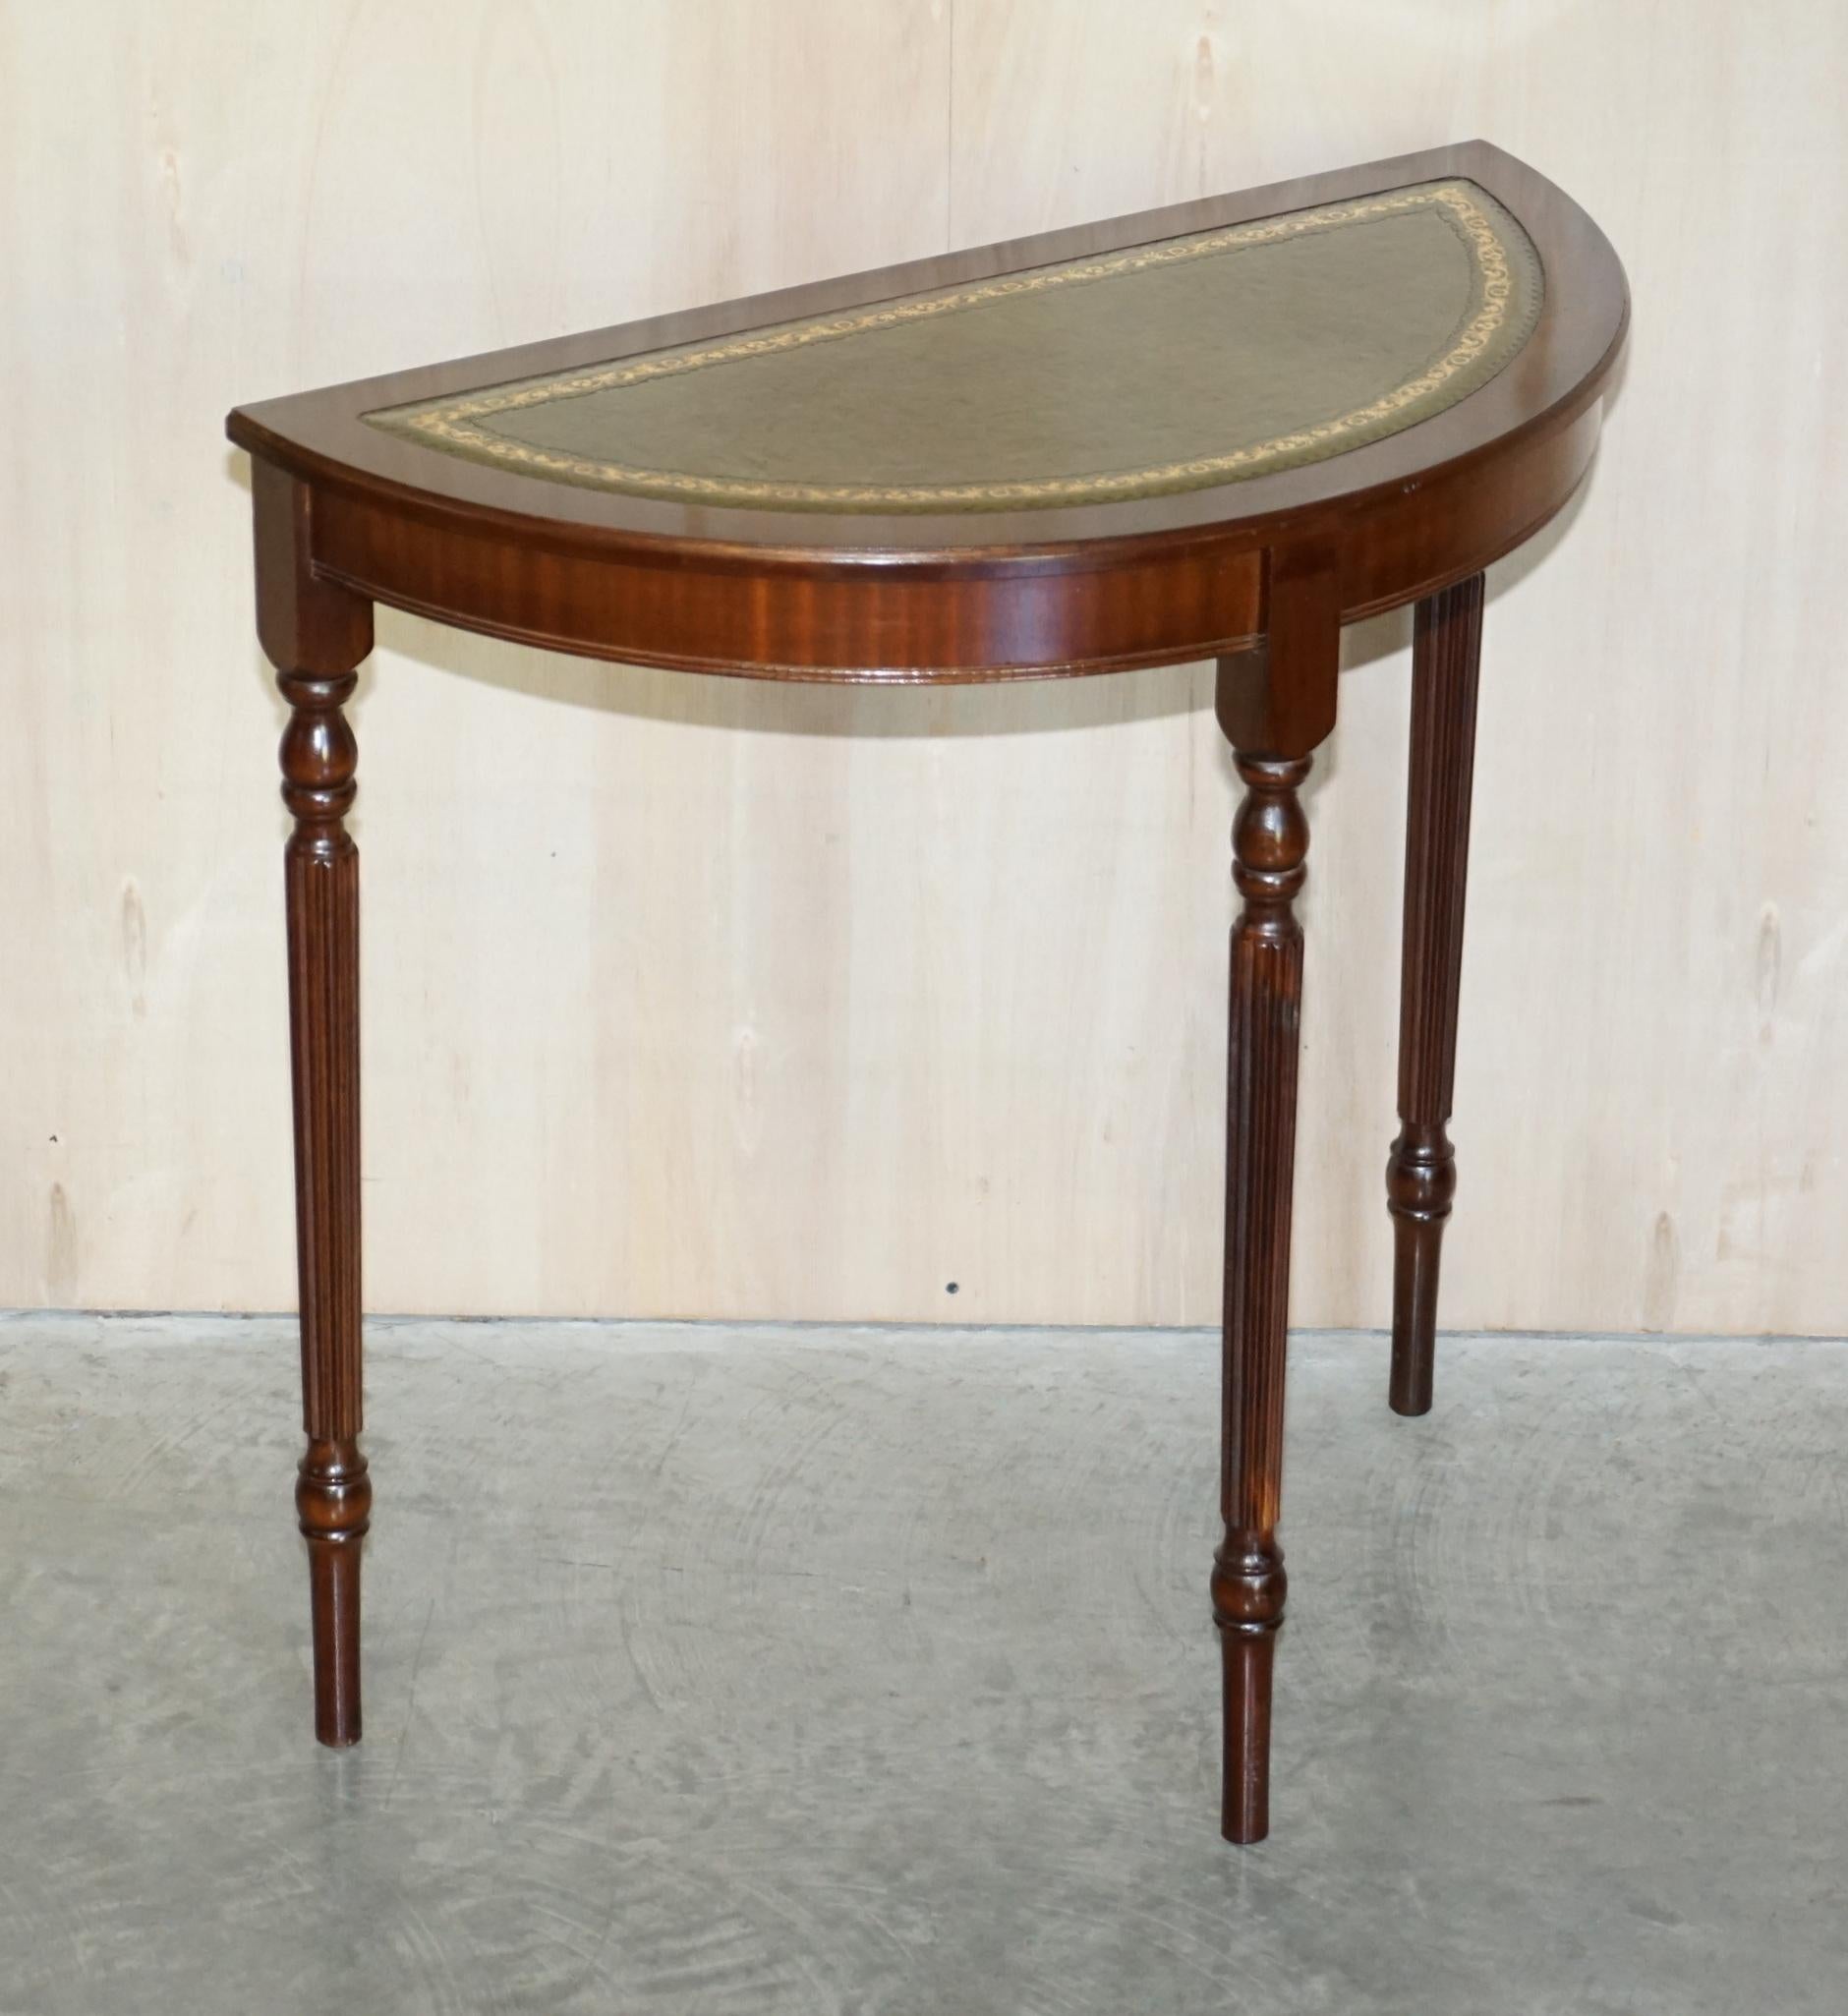 We are delighted to offer for sale this lovely vintage half moon mahogany with green leather top demi lune console table

A good looking well made and decorative table, it has a nice vintage patina to it and works well in any setting

We have